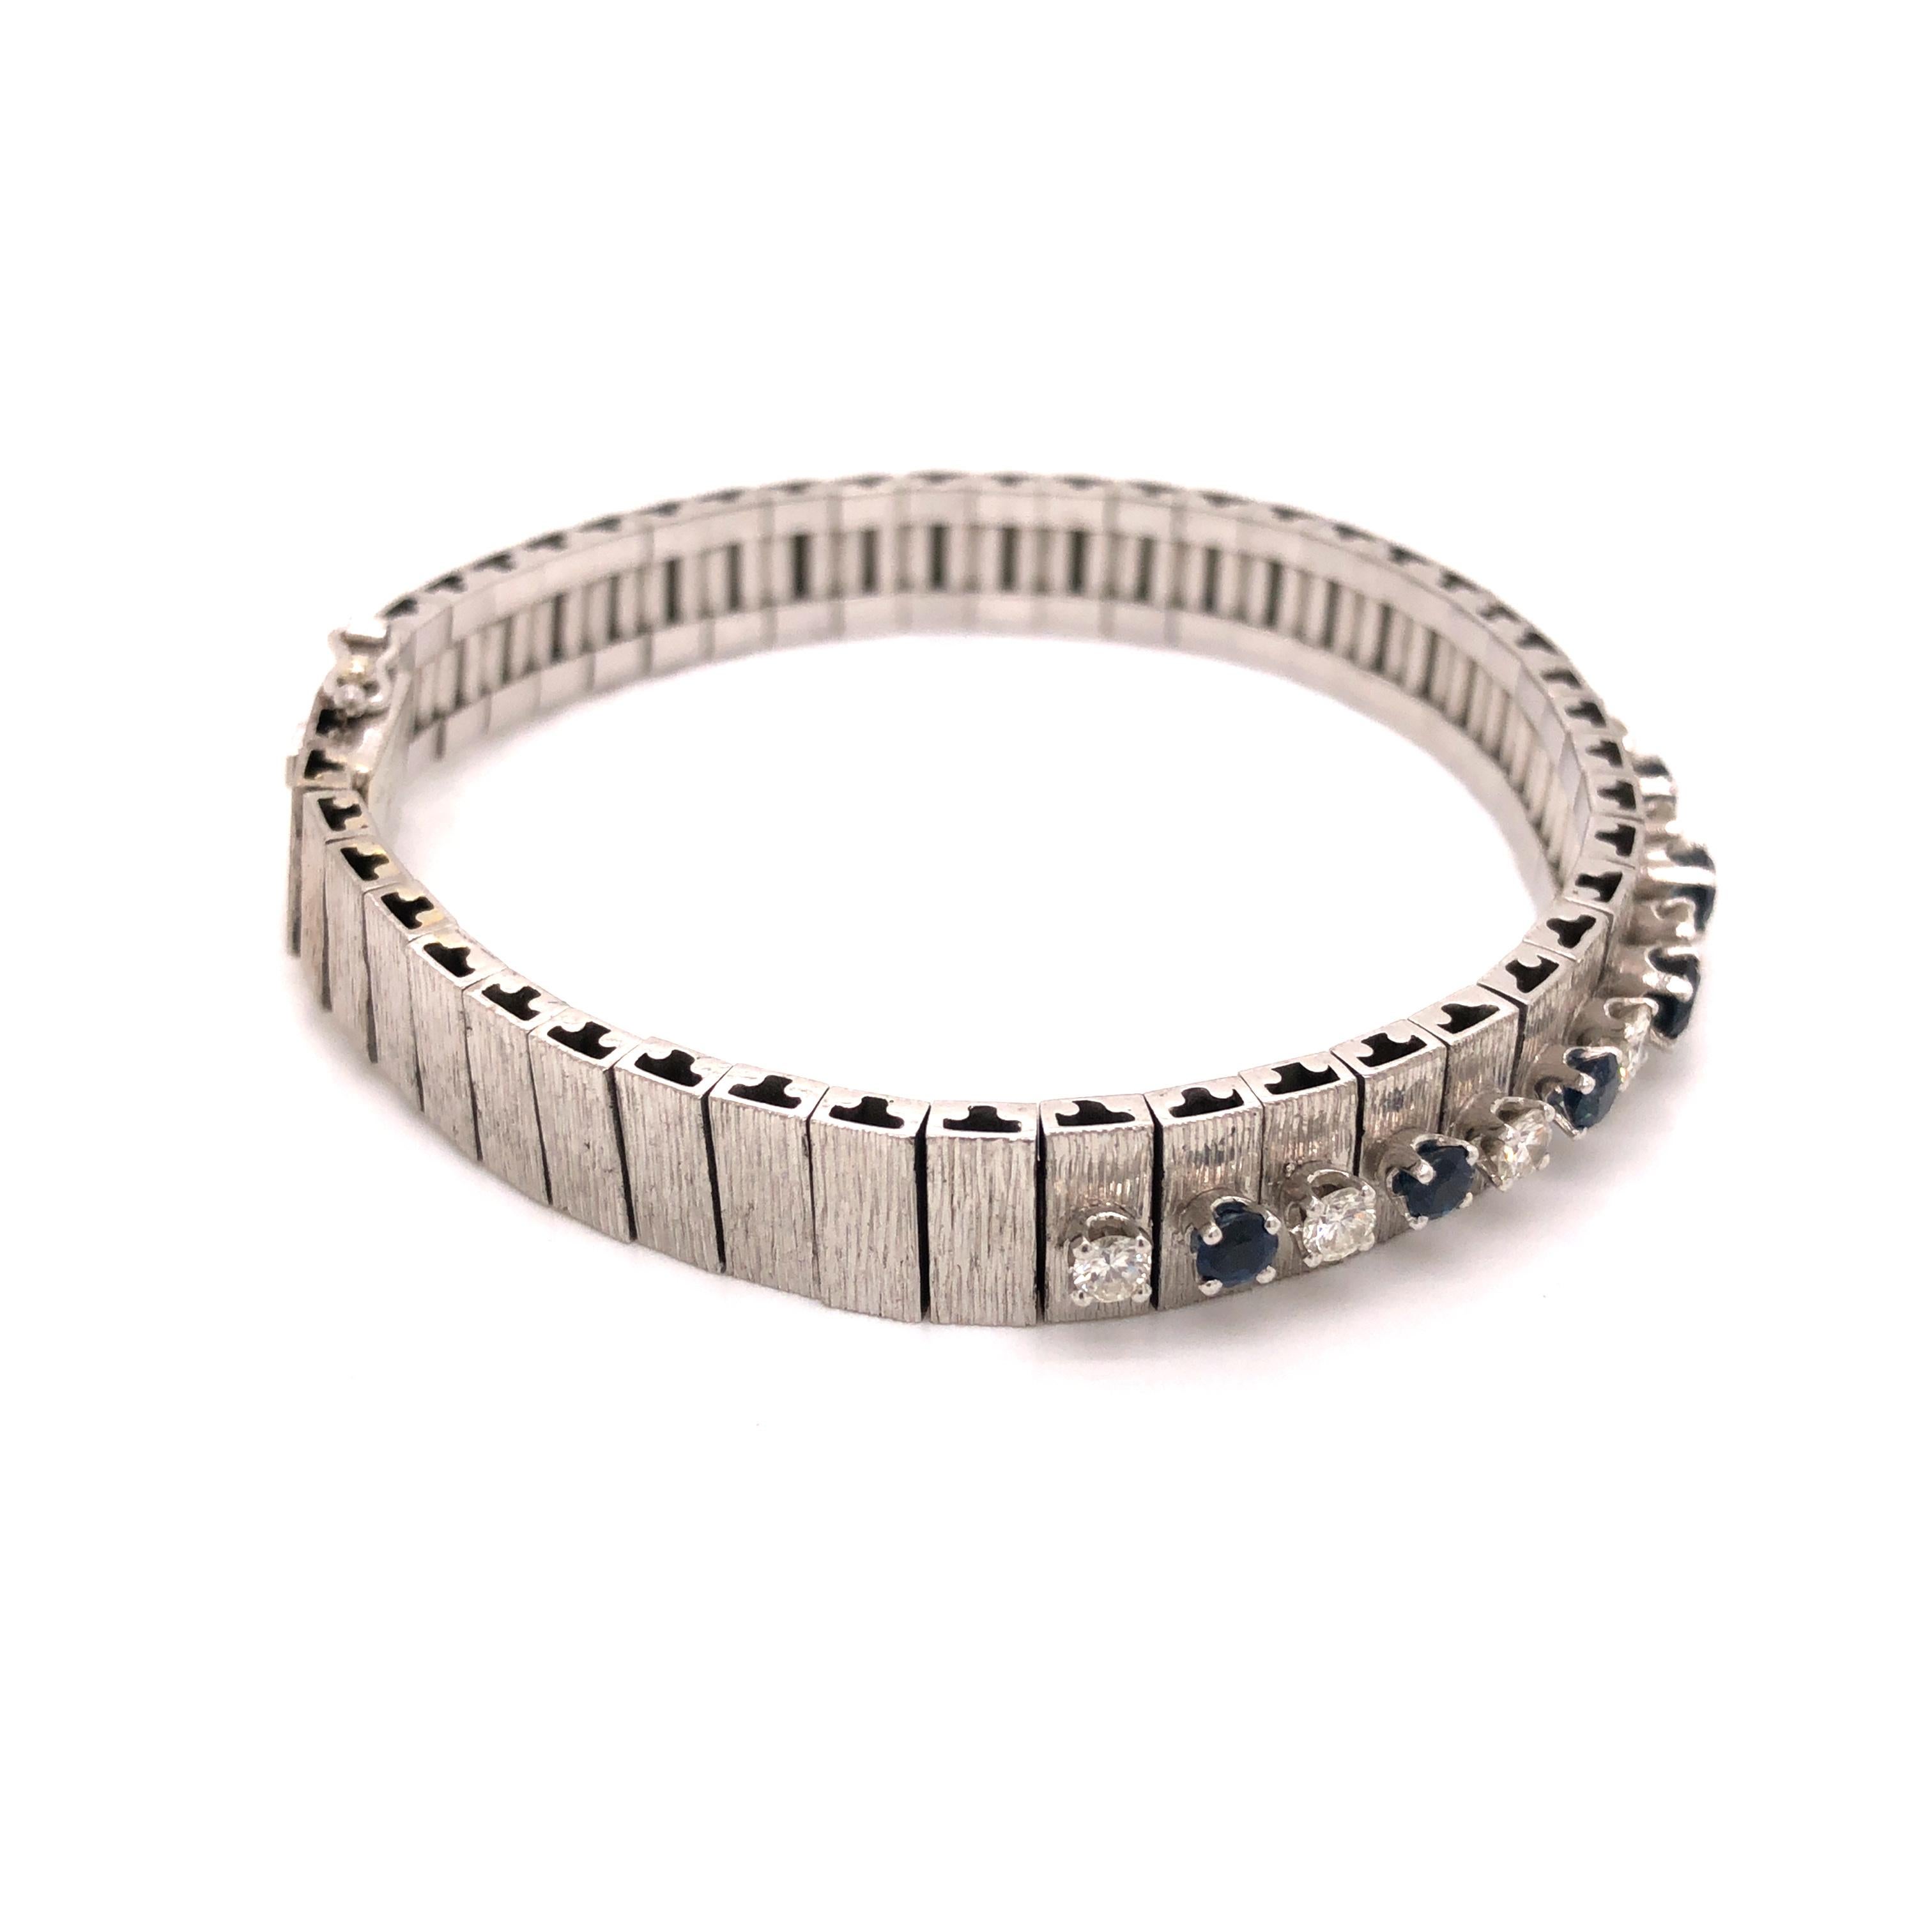 18K white gold textured bracelet featuring a graduated row composed of alternating round sapphires and round diamonds weighing a total of approximately 1 carat, G-H color, VS clarity.

Stone: Sapphire, Diamond

Metal: 18K White Gold

Size: 7